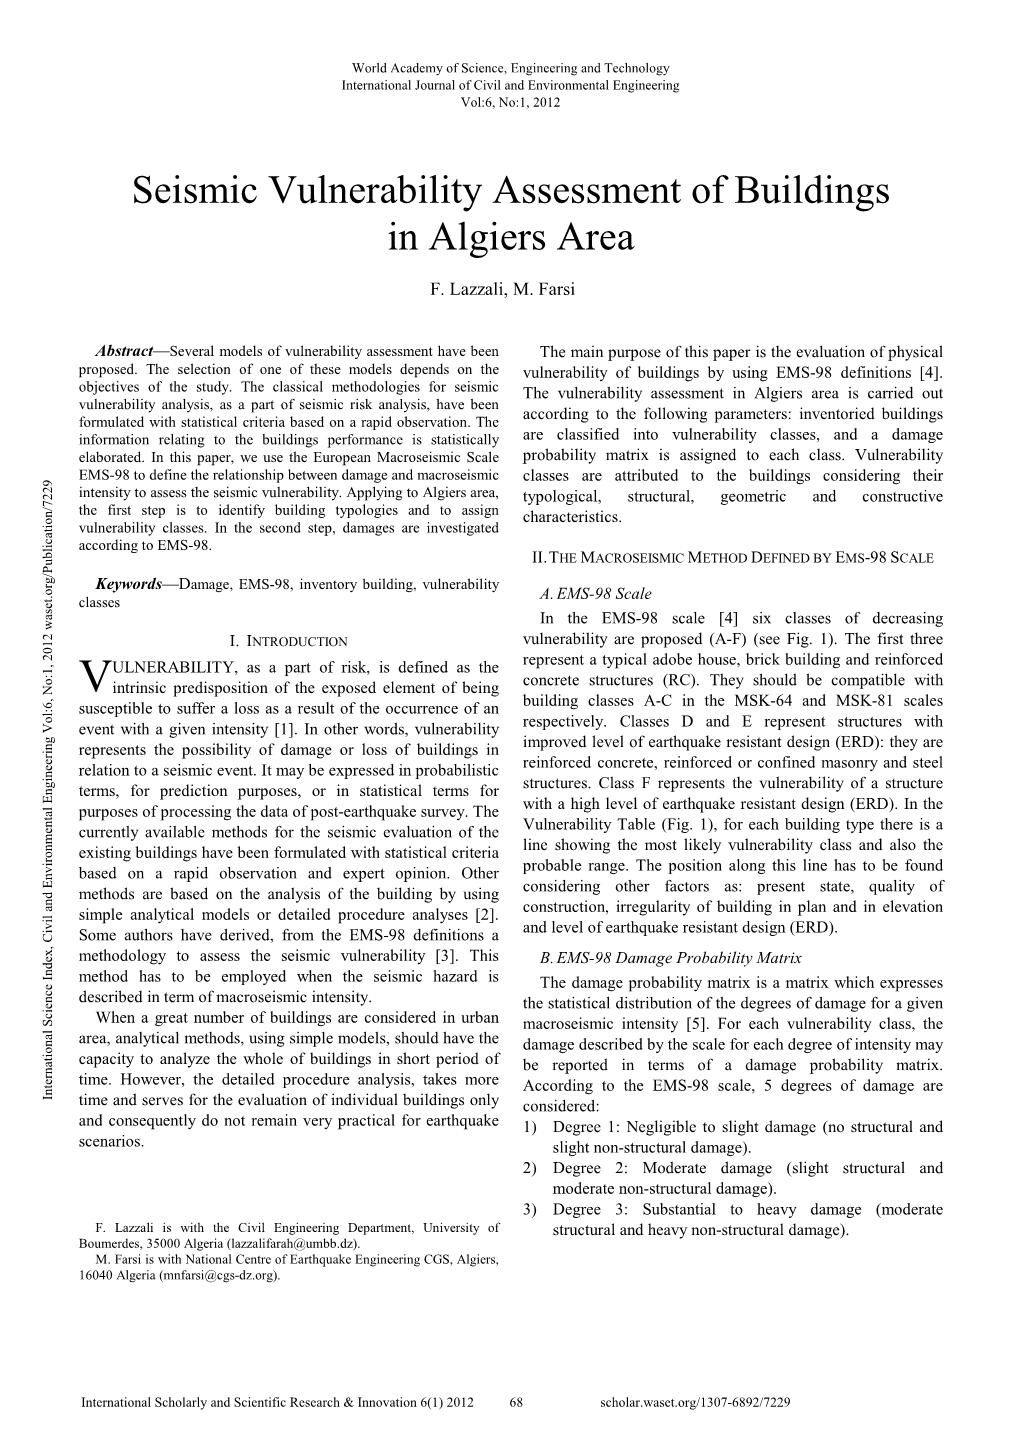 Seismic Vulnerability Assessment of Buildings in Algiers Area